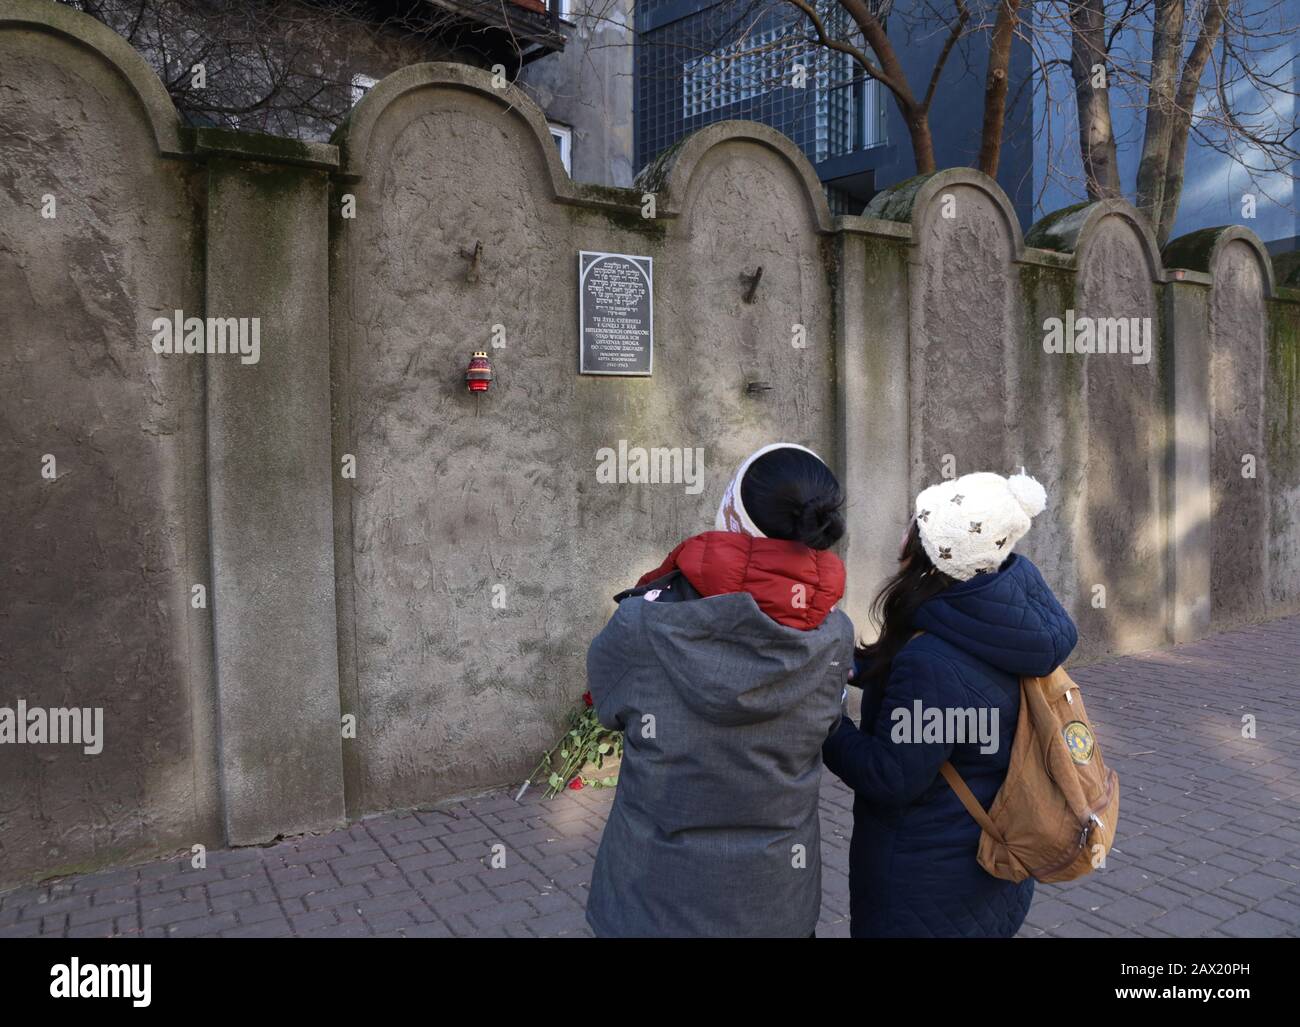 Cracow. Krakow. Poland. Former Cracow`s ghetto in Podgorze district. The last remaining section of the original ghetto wall at Lwowska Street. Stock Photo